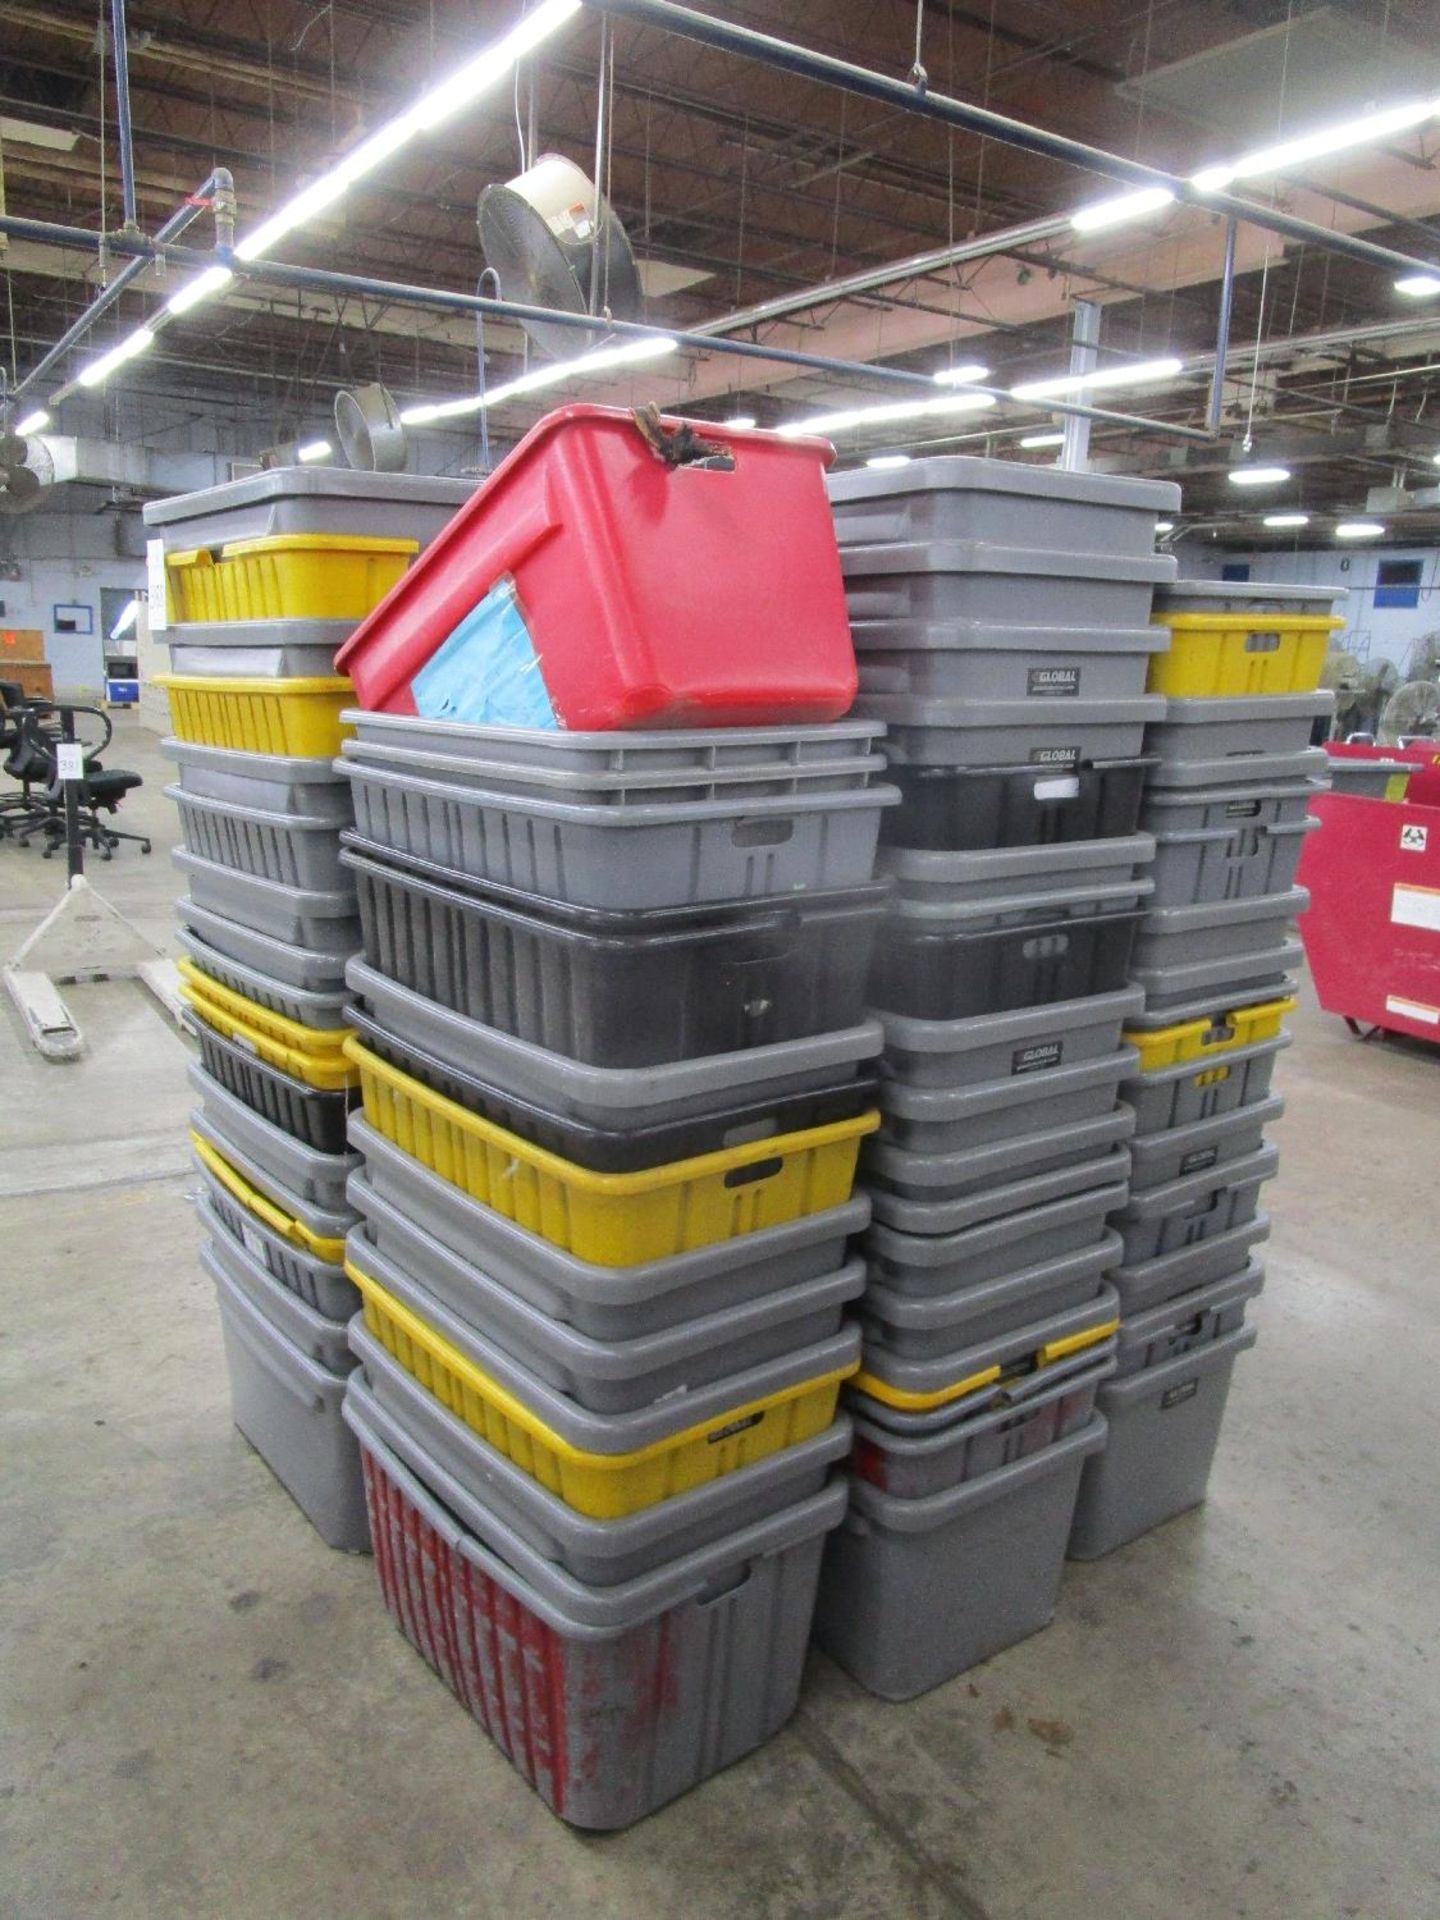 Lot of Stackable Plastic Bins - Image 2 of 2